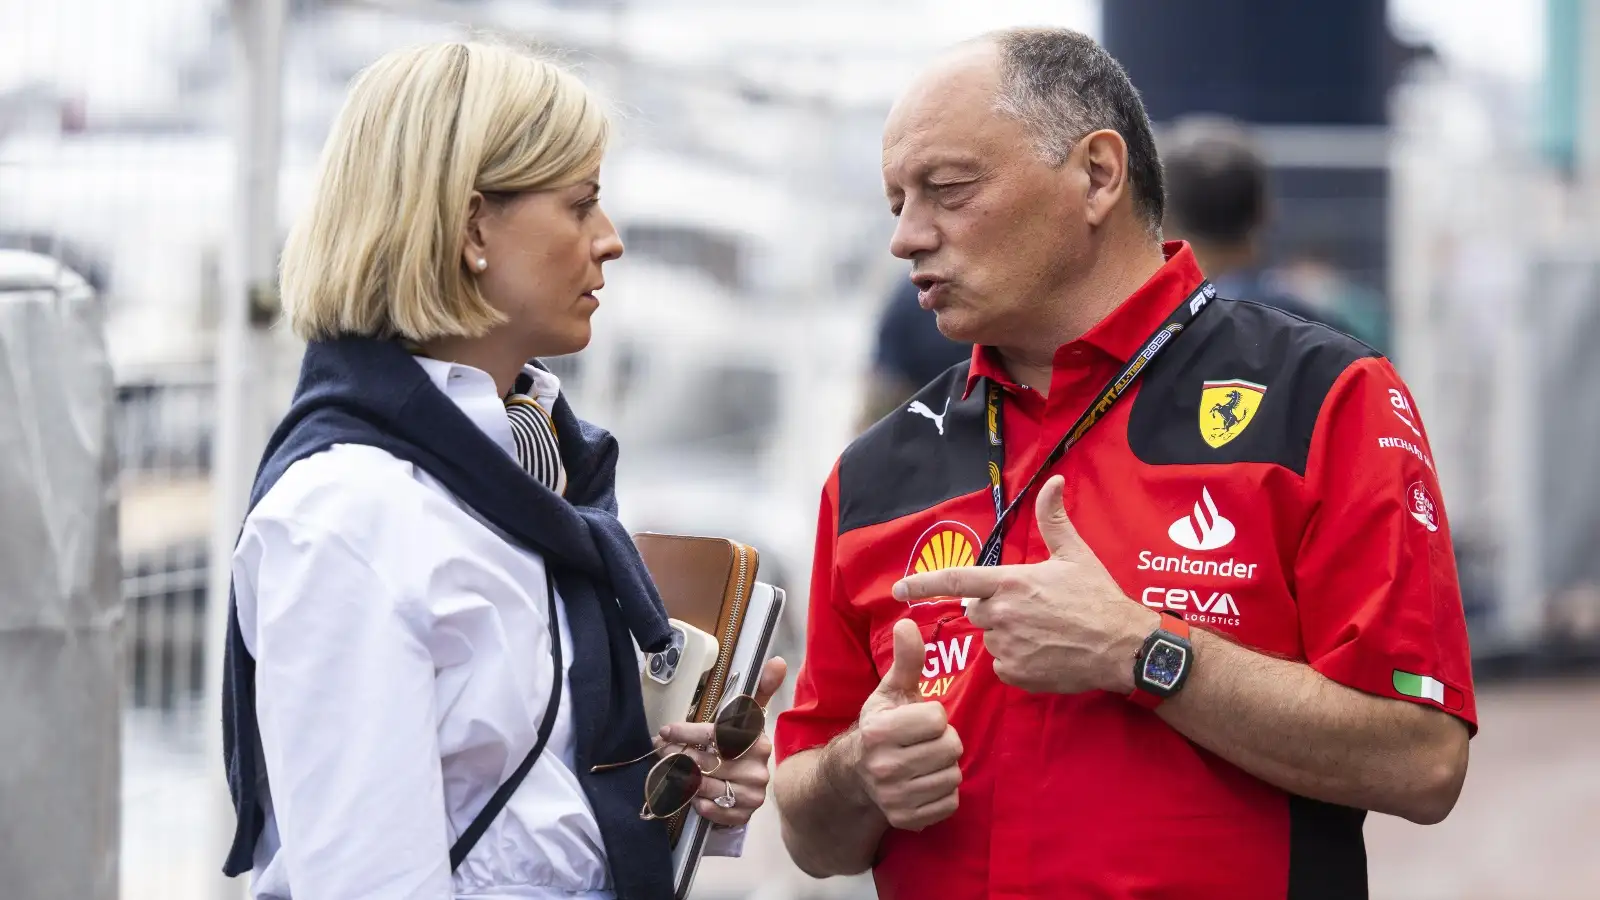 Susie Wolff chats to Fred Vasseur